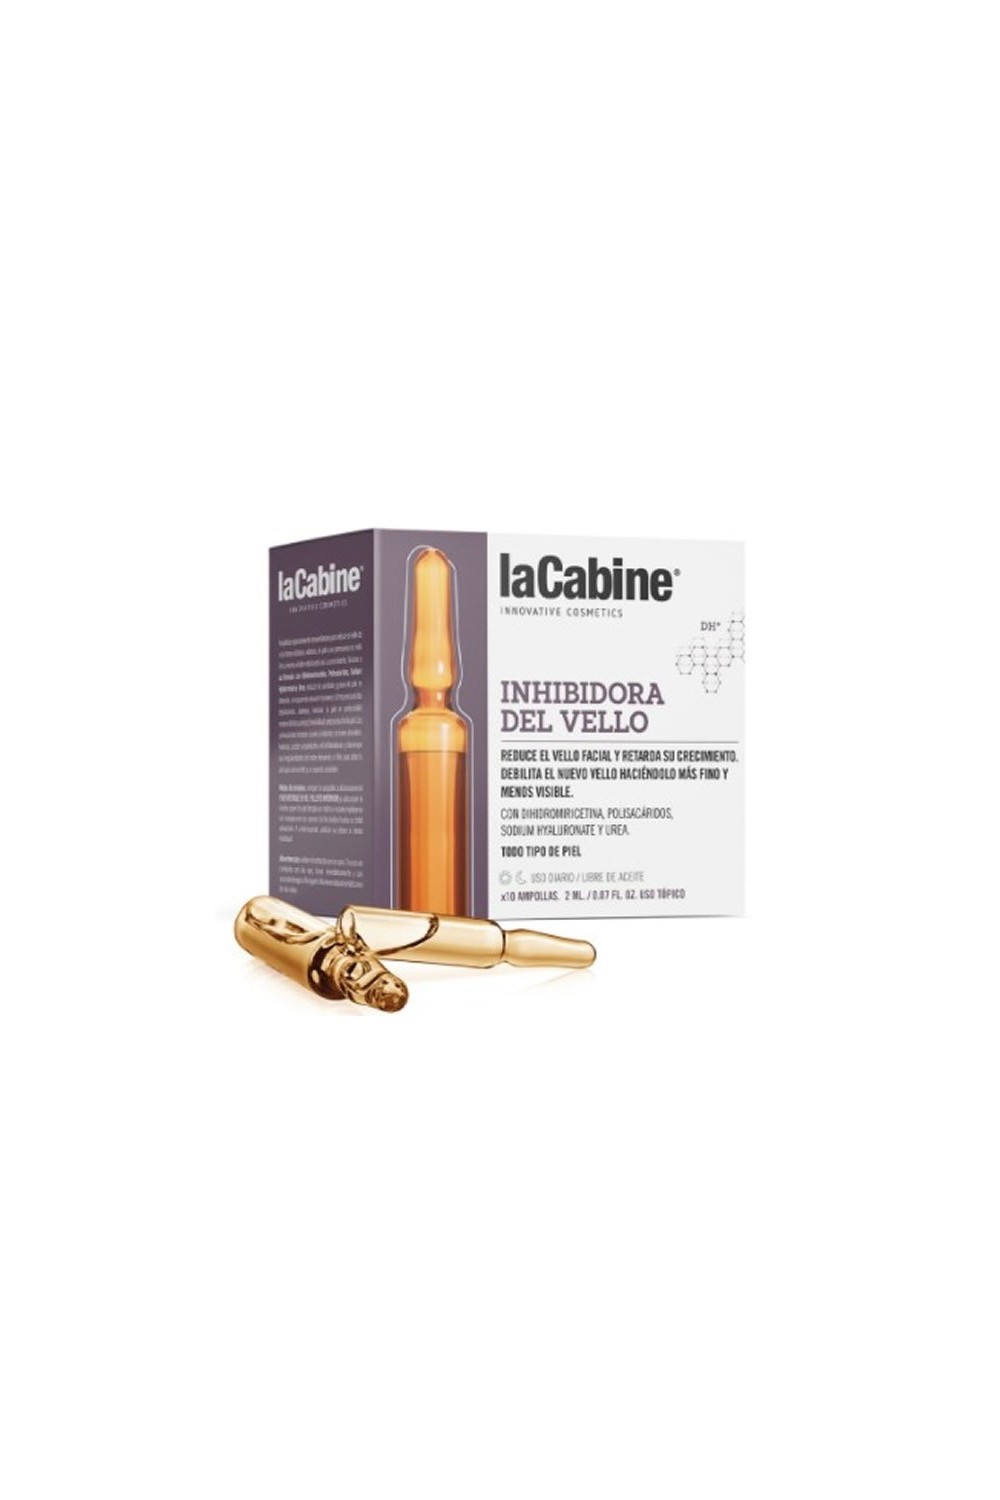 La Cabine Hair Inhibitor Ampoules 10x2ml